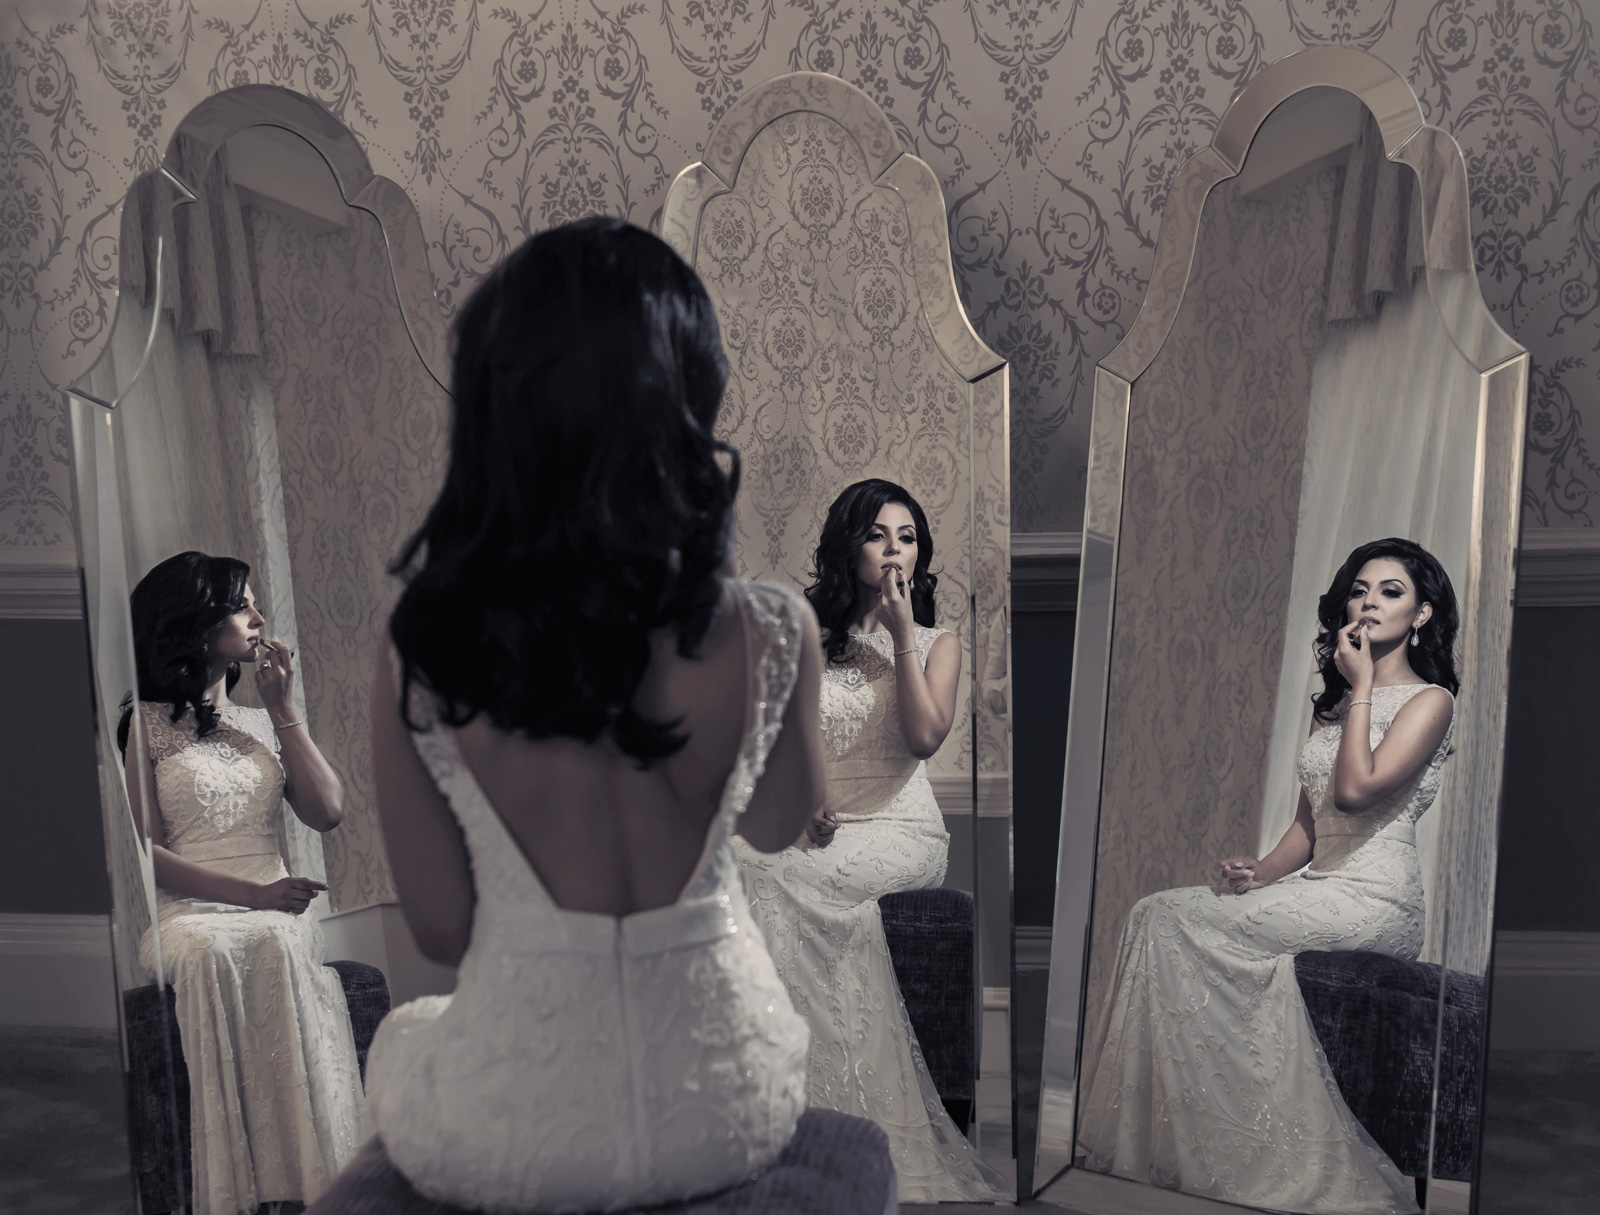 Bride Getting Ready In Mirrors